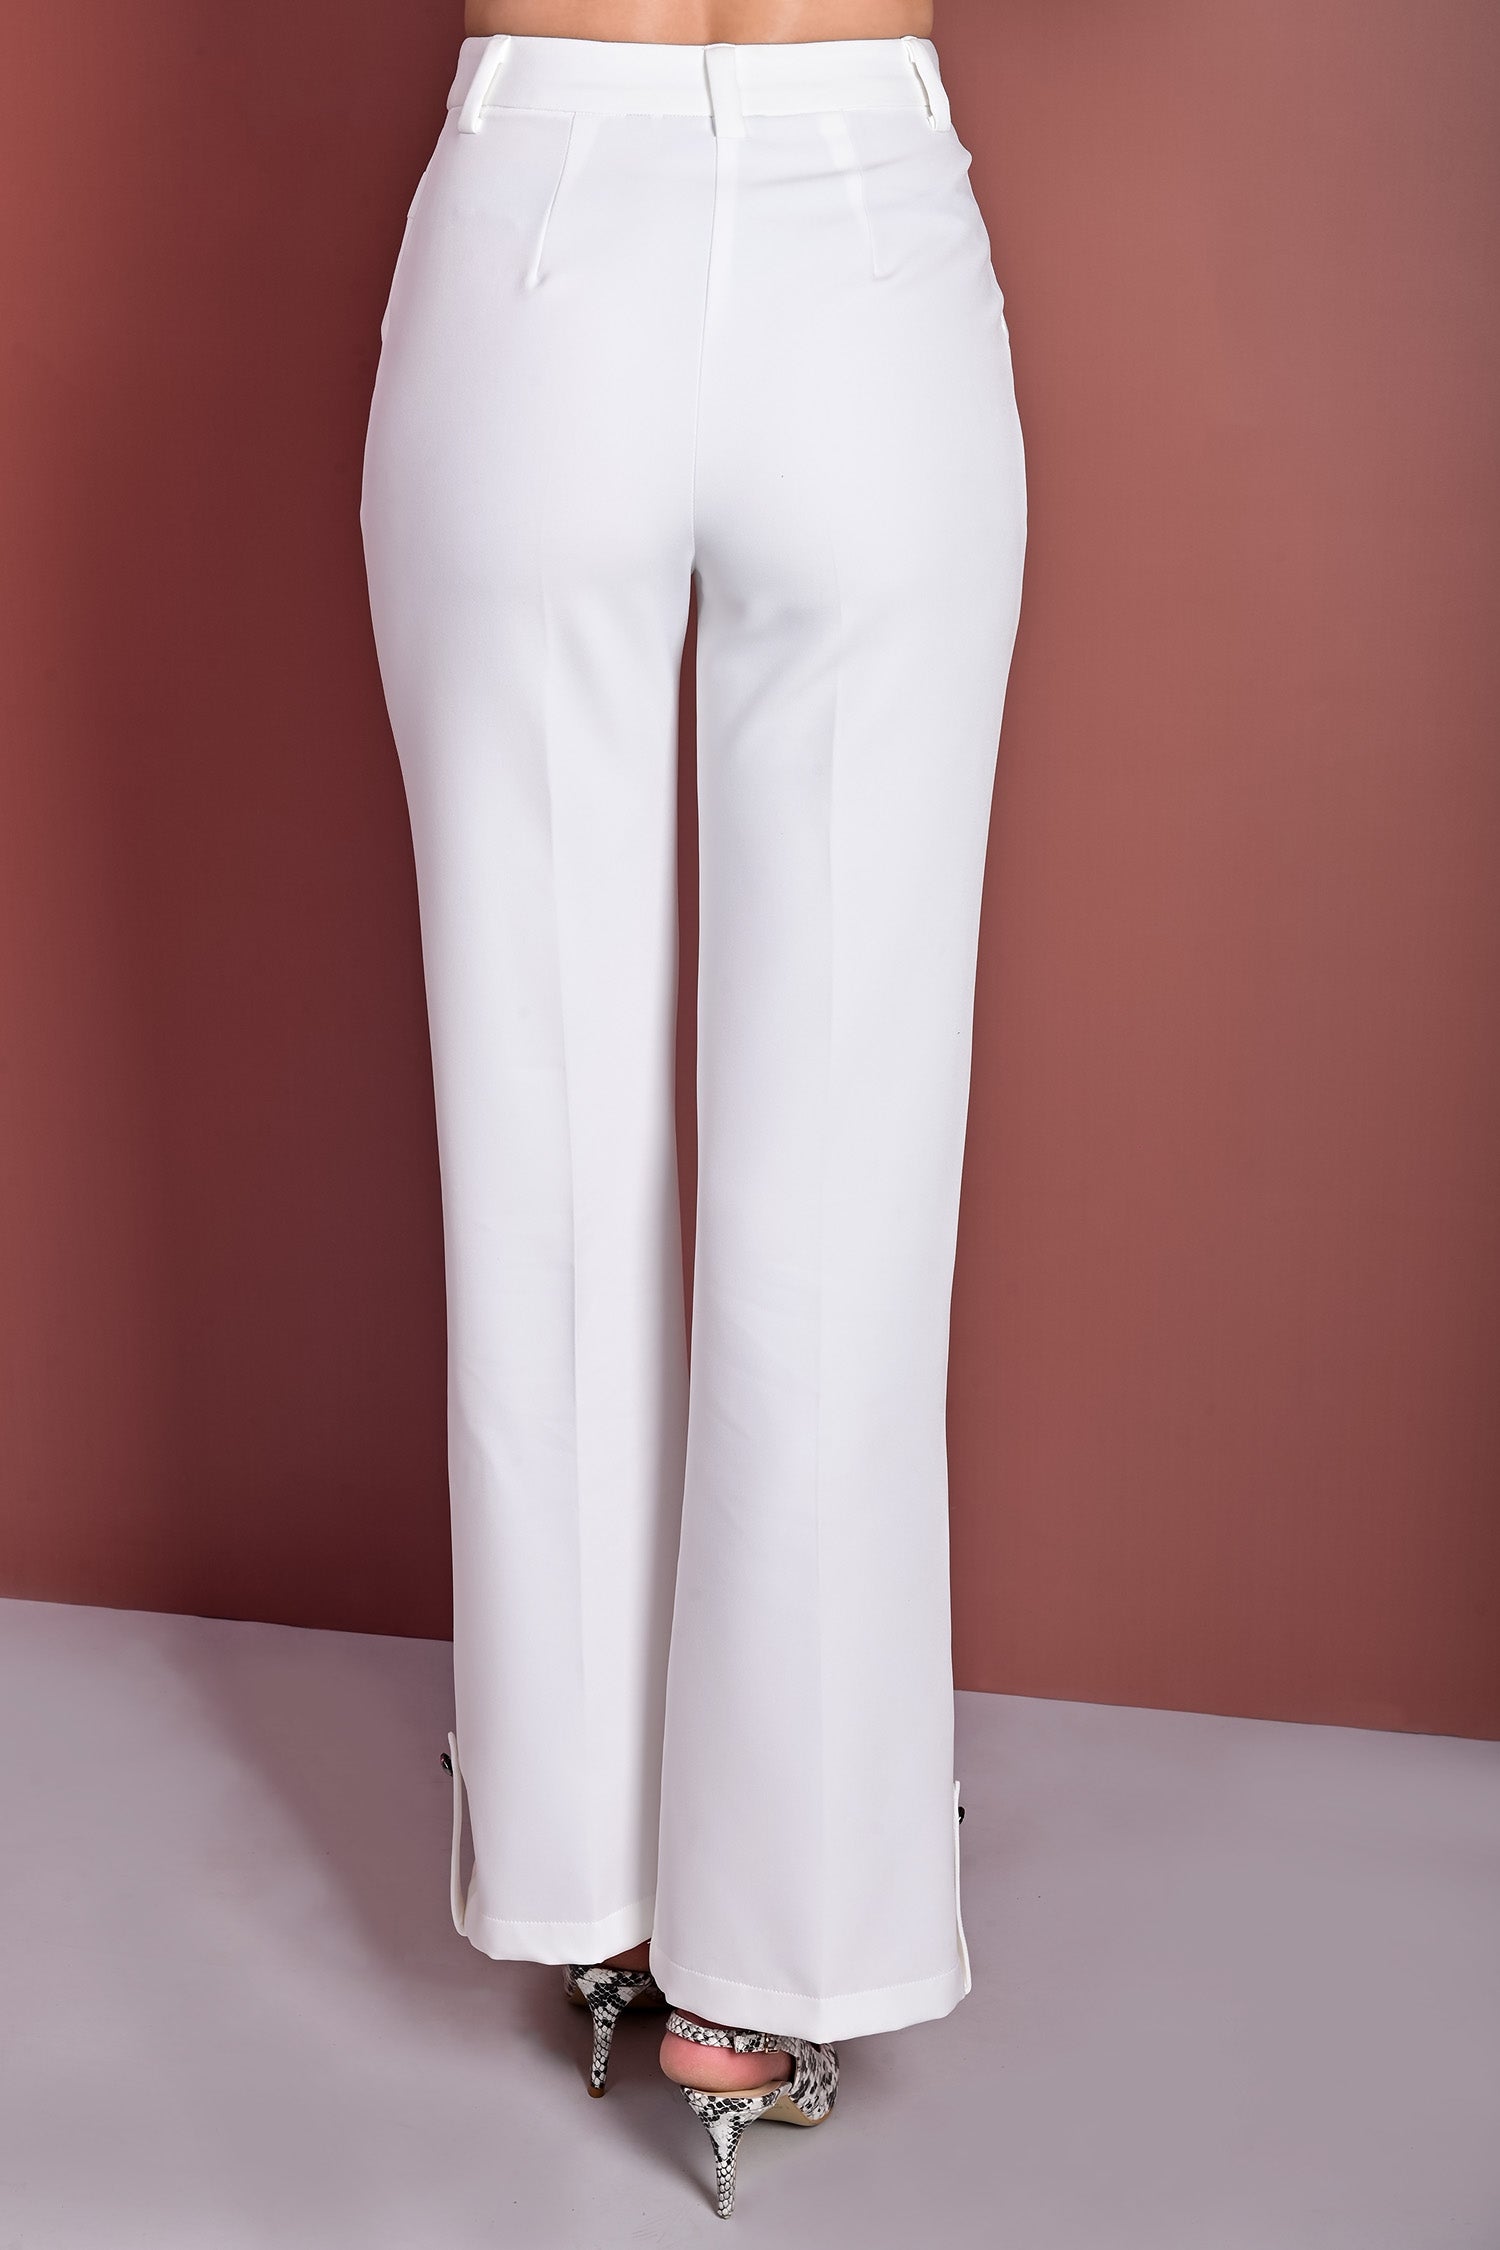 Romance Flared Trousers With Box Pocket Flap